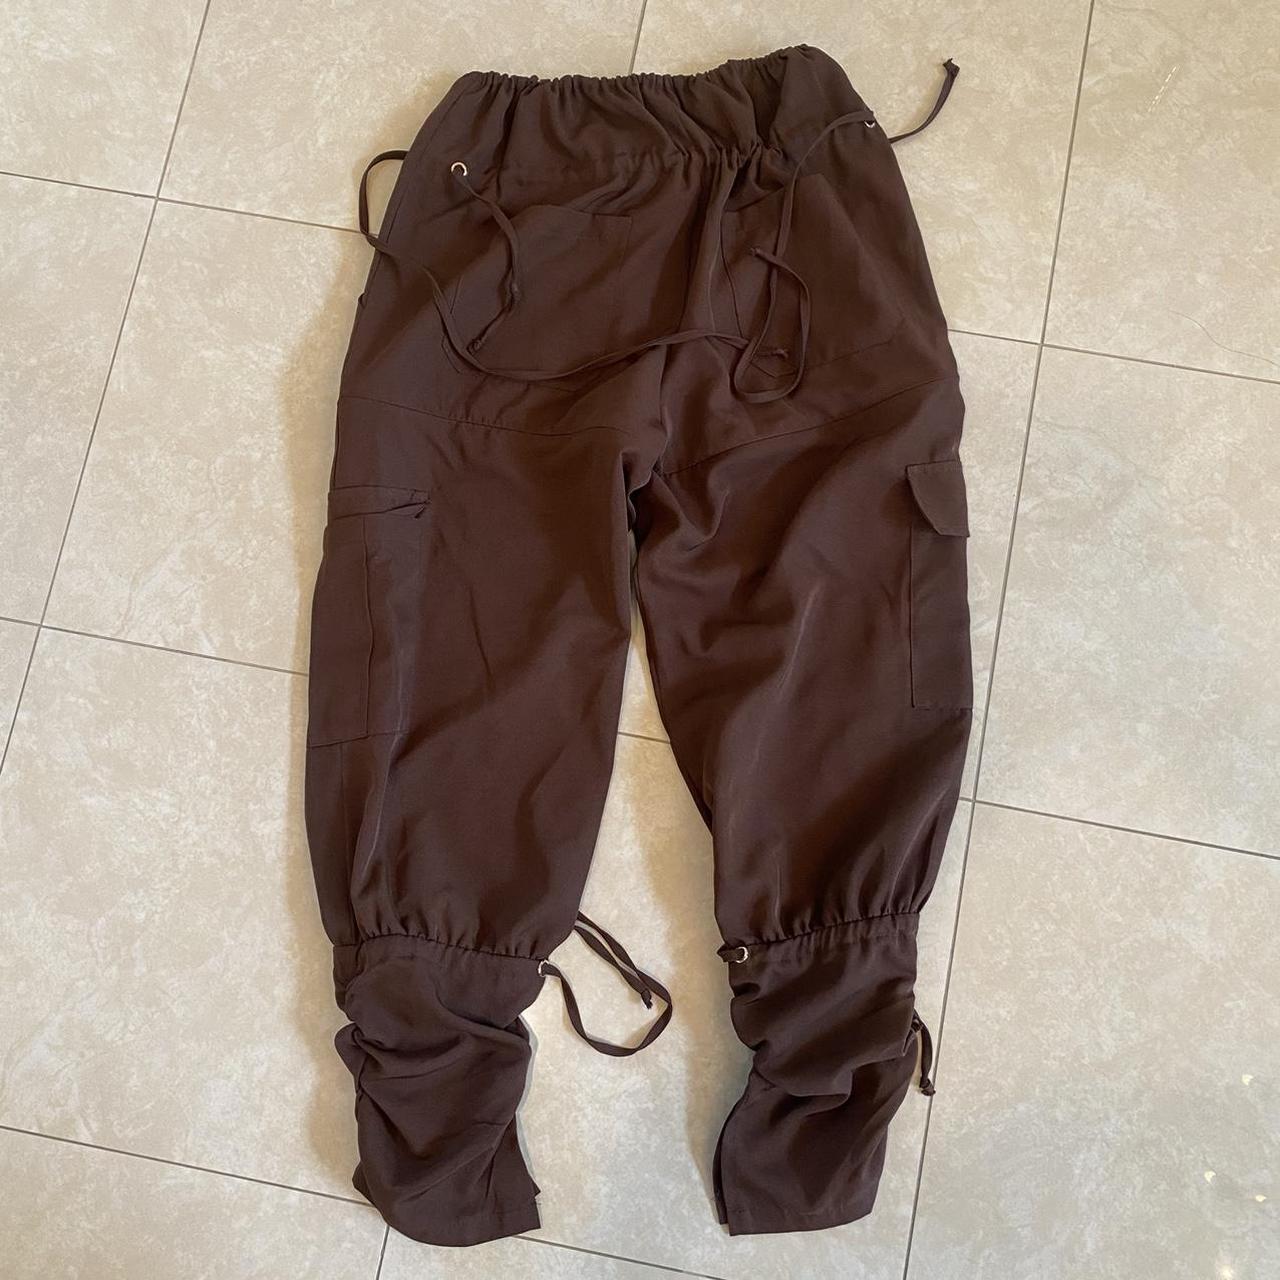 The most insane brown pants with tie detailing on... - Depop